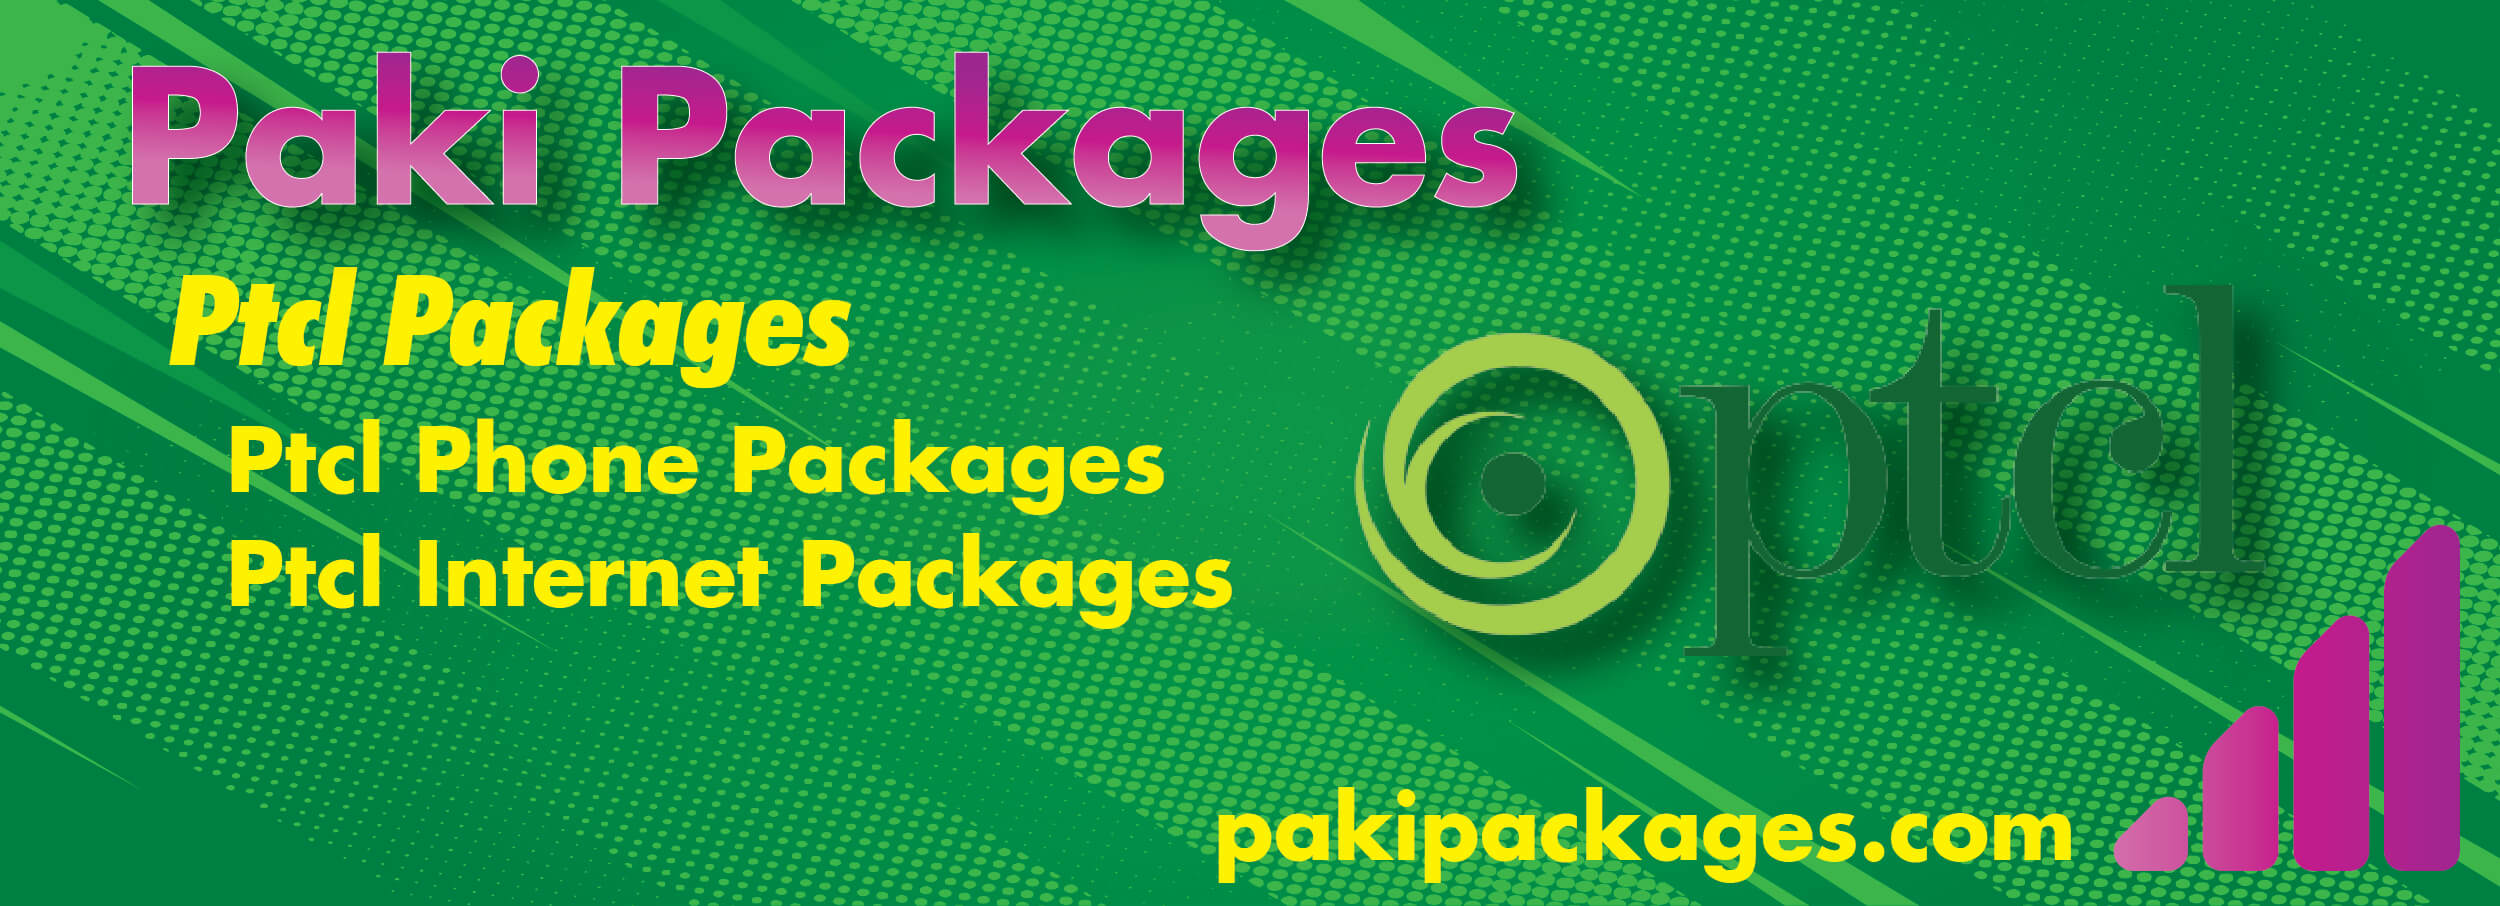 Ptcl Packages